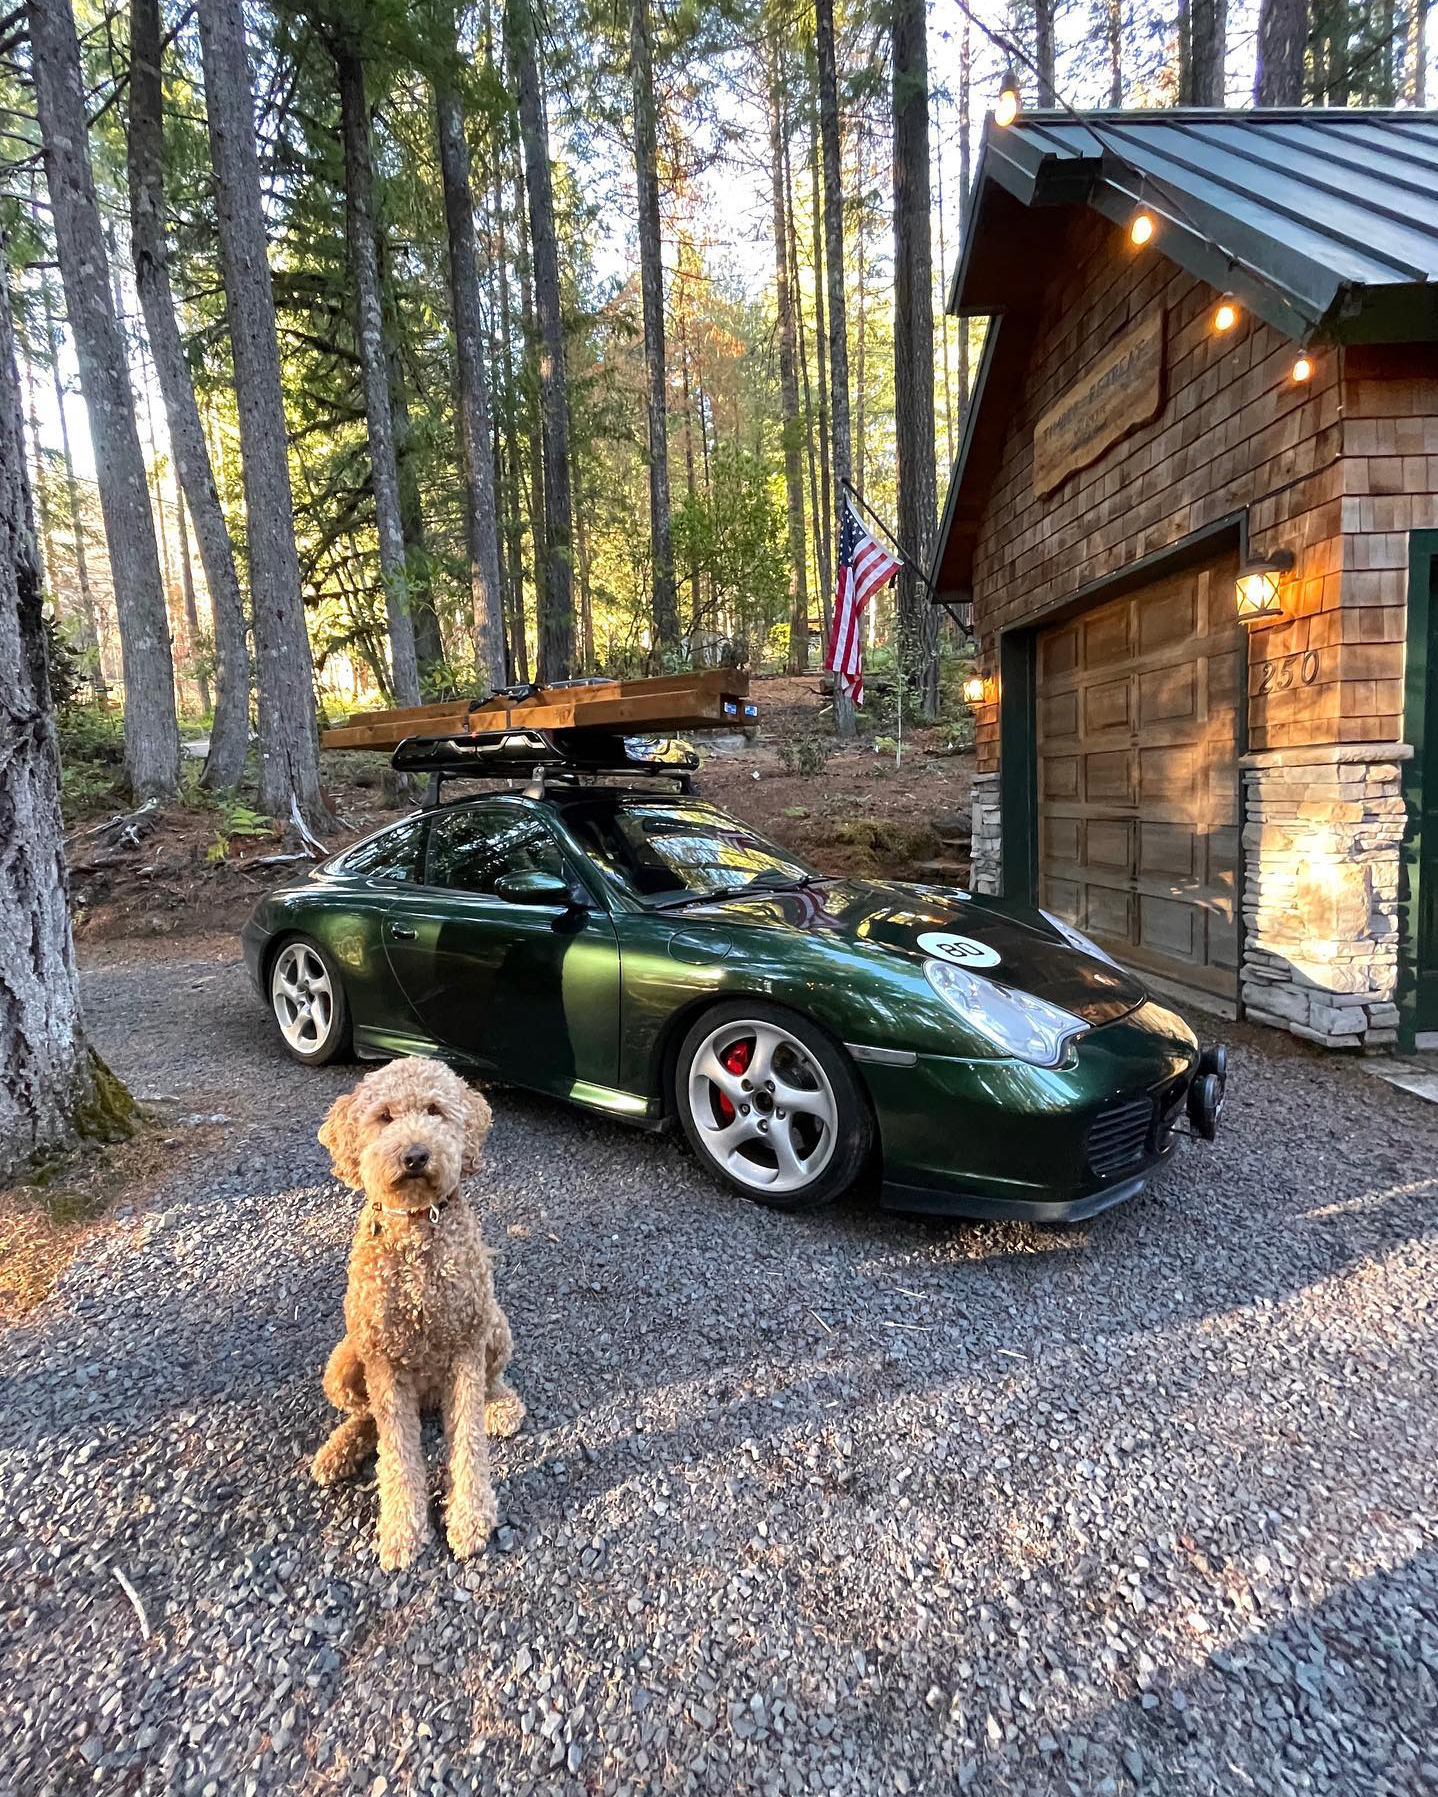 Golden Labradoodle in front of green Porsche in forest